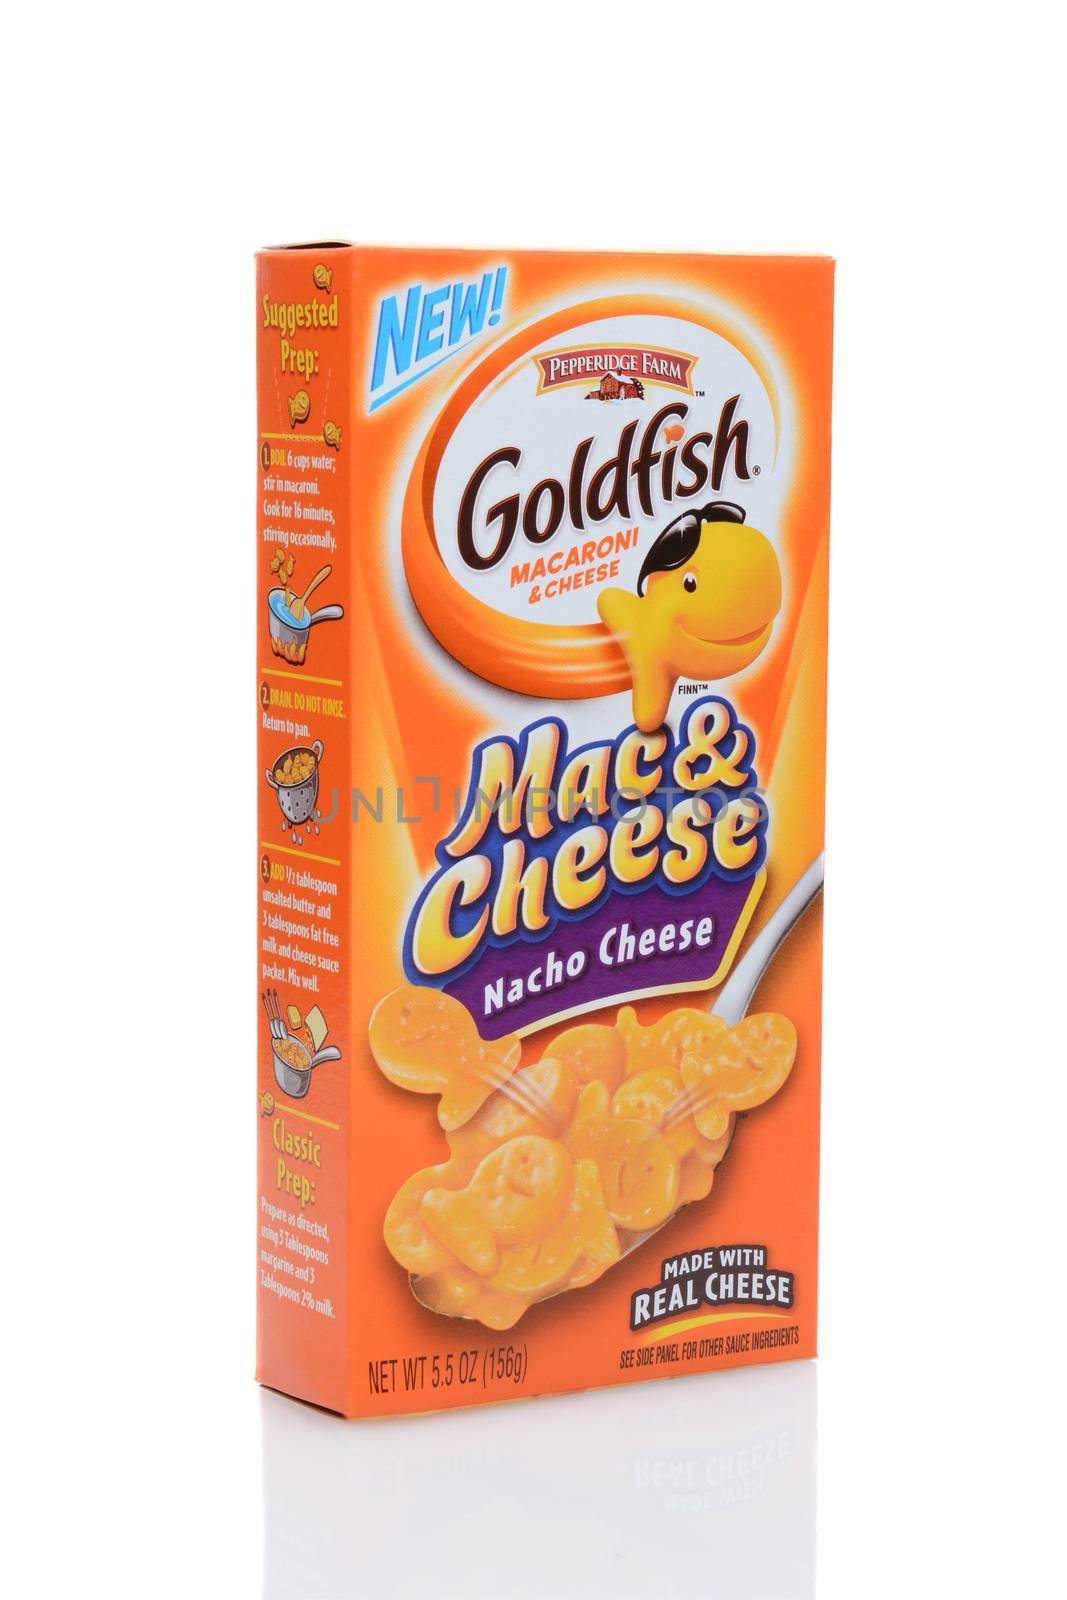 IRVINE, CALIFORNIA - JULY 14, 2014: A box of Goldfish Macaroni & Cheese. From the Pepperidge Farms the boxed meal features the iconic Goldfish shape from their familiar snack cracker.